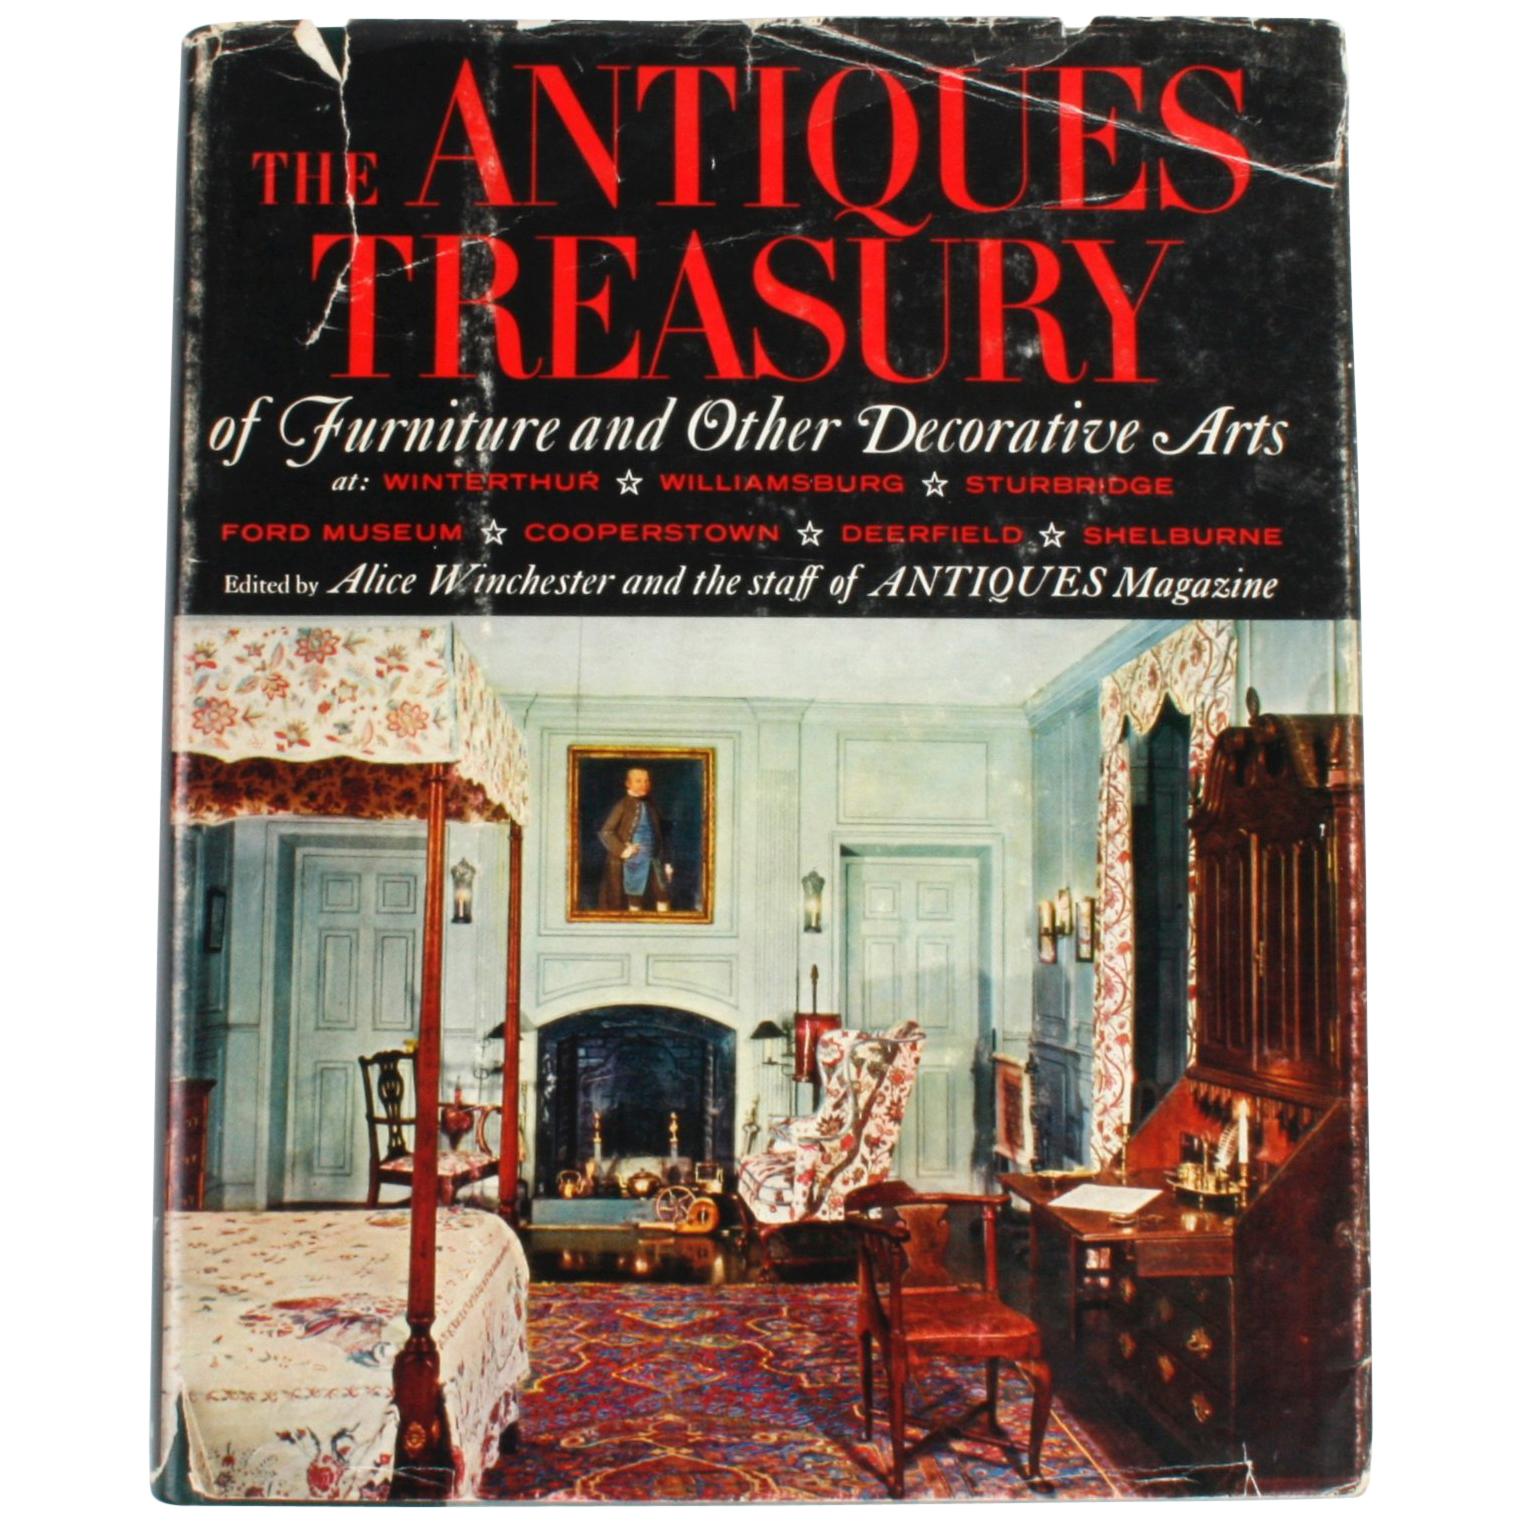 "The Antiques Treasury of Furniture and Other Decorative Arts" Book